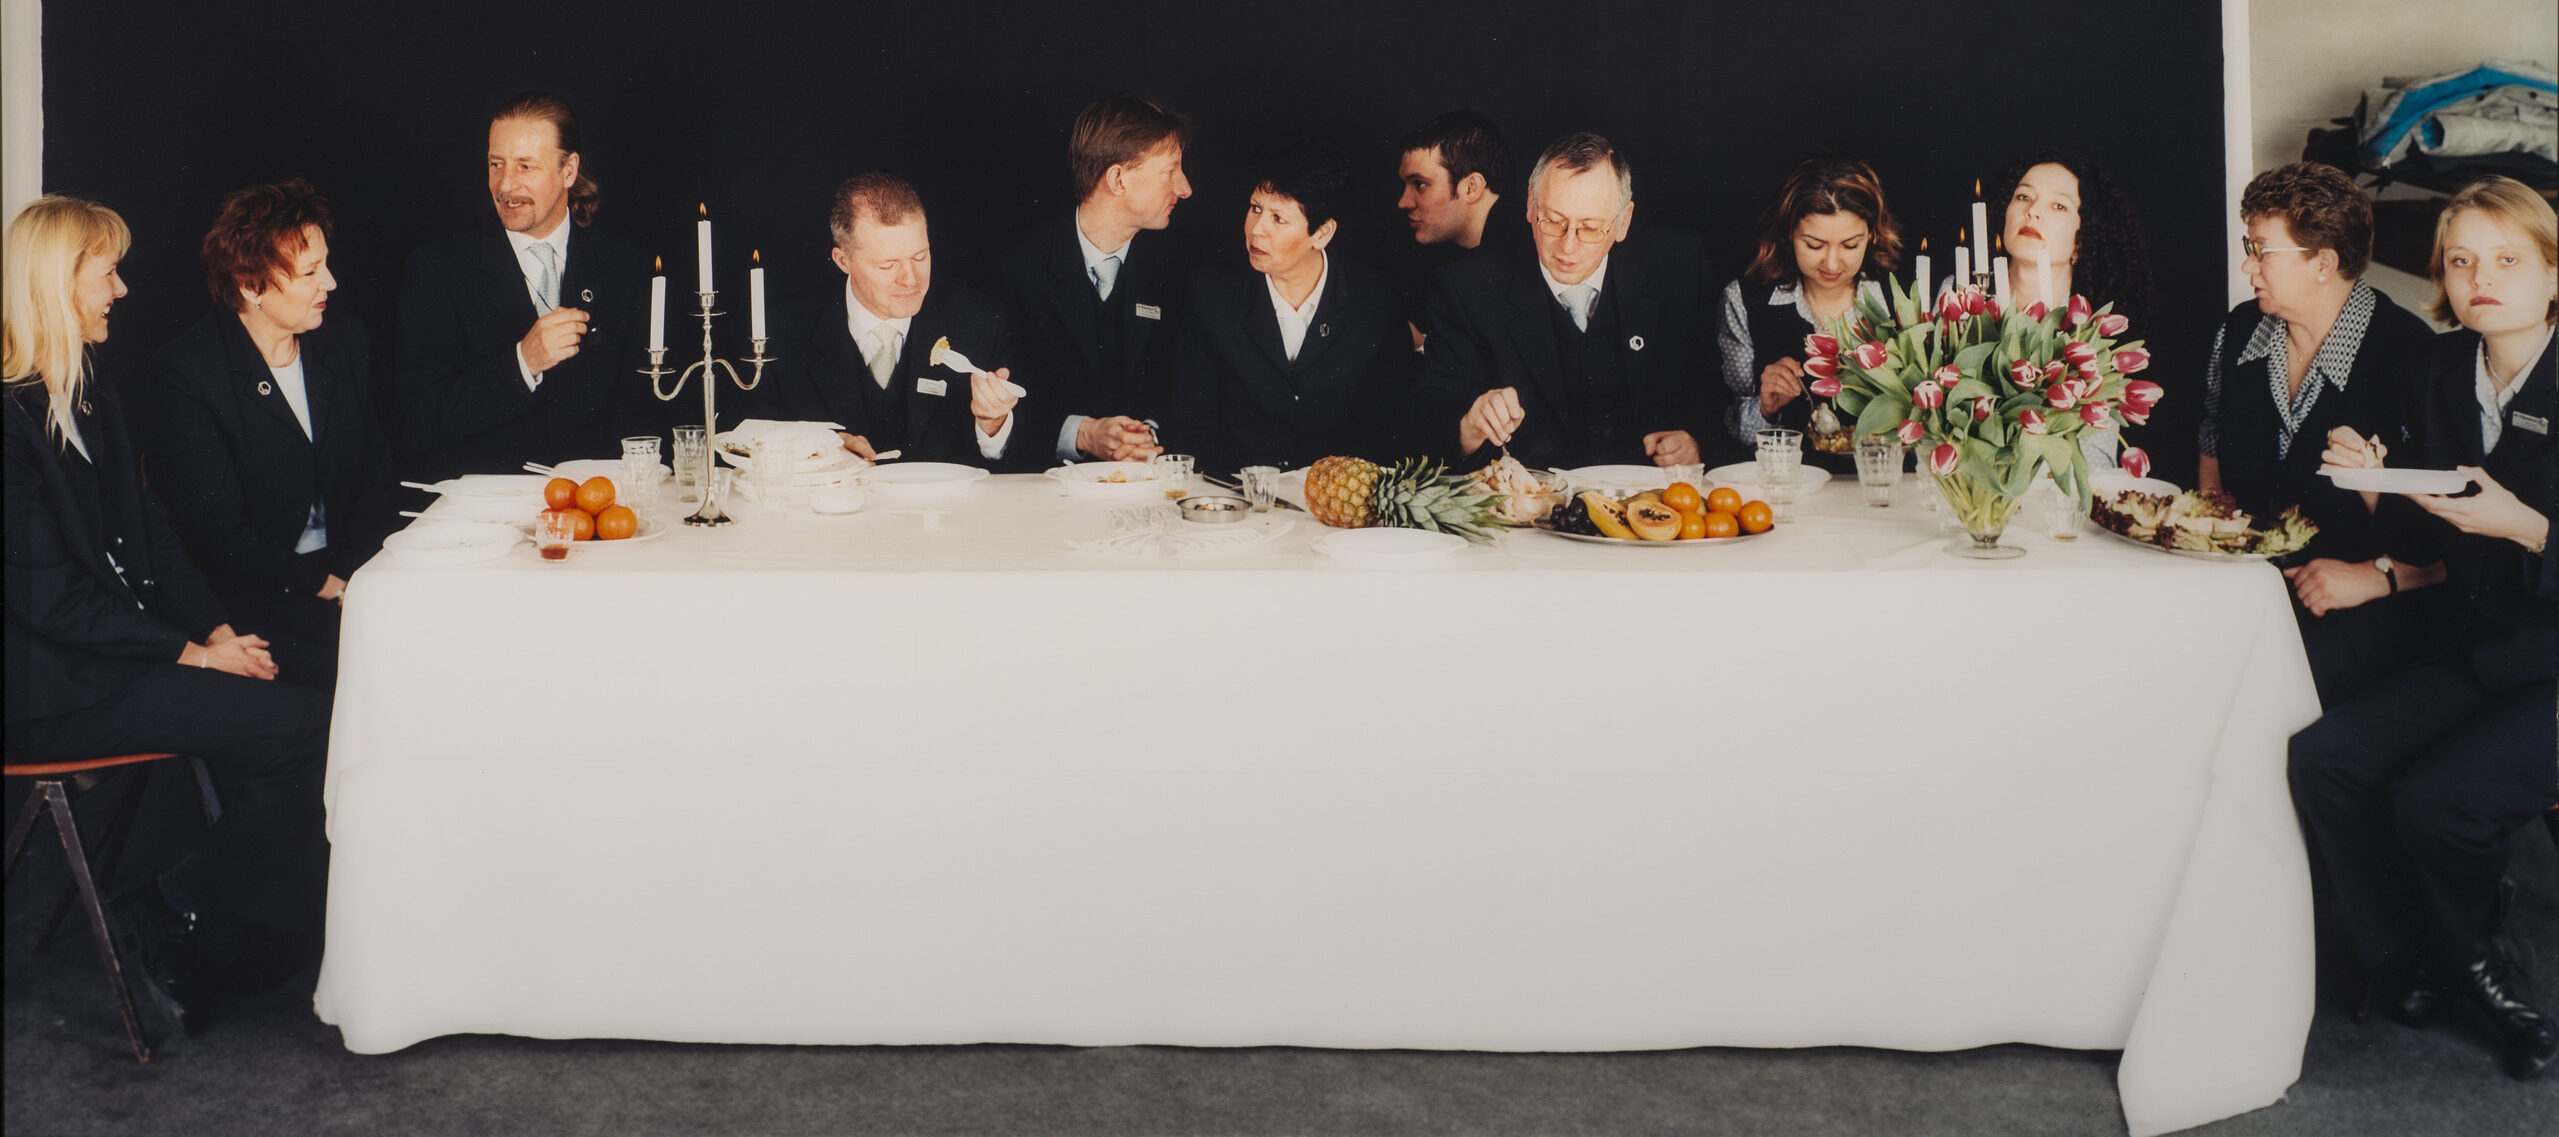 Twelve light-skinned men and women in dark suits sit on the ends and far side of rectangular table situated horizontally to the viewer. Covered with a white cloth, the table holds 2 candelabra, a flower bouquet, and assorted fruit. The people eat, chat, or look out at viewers.